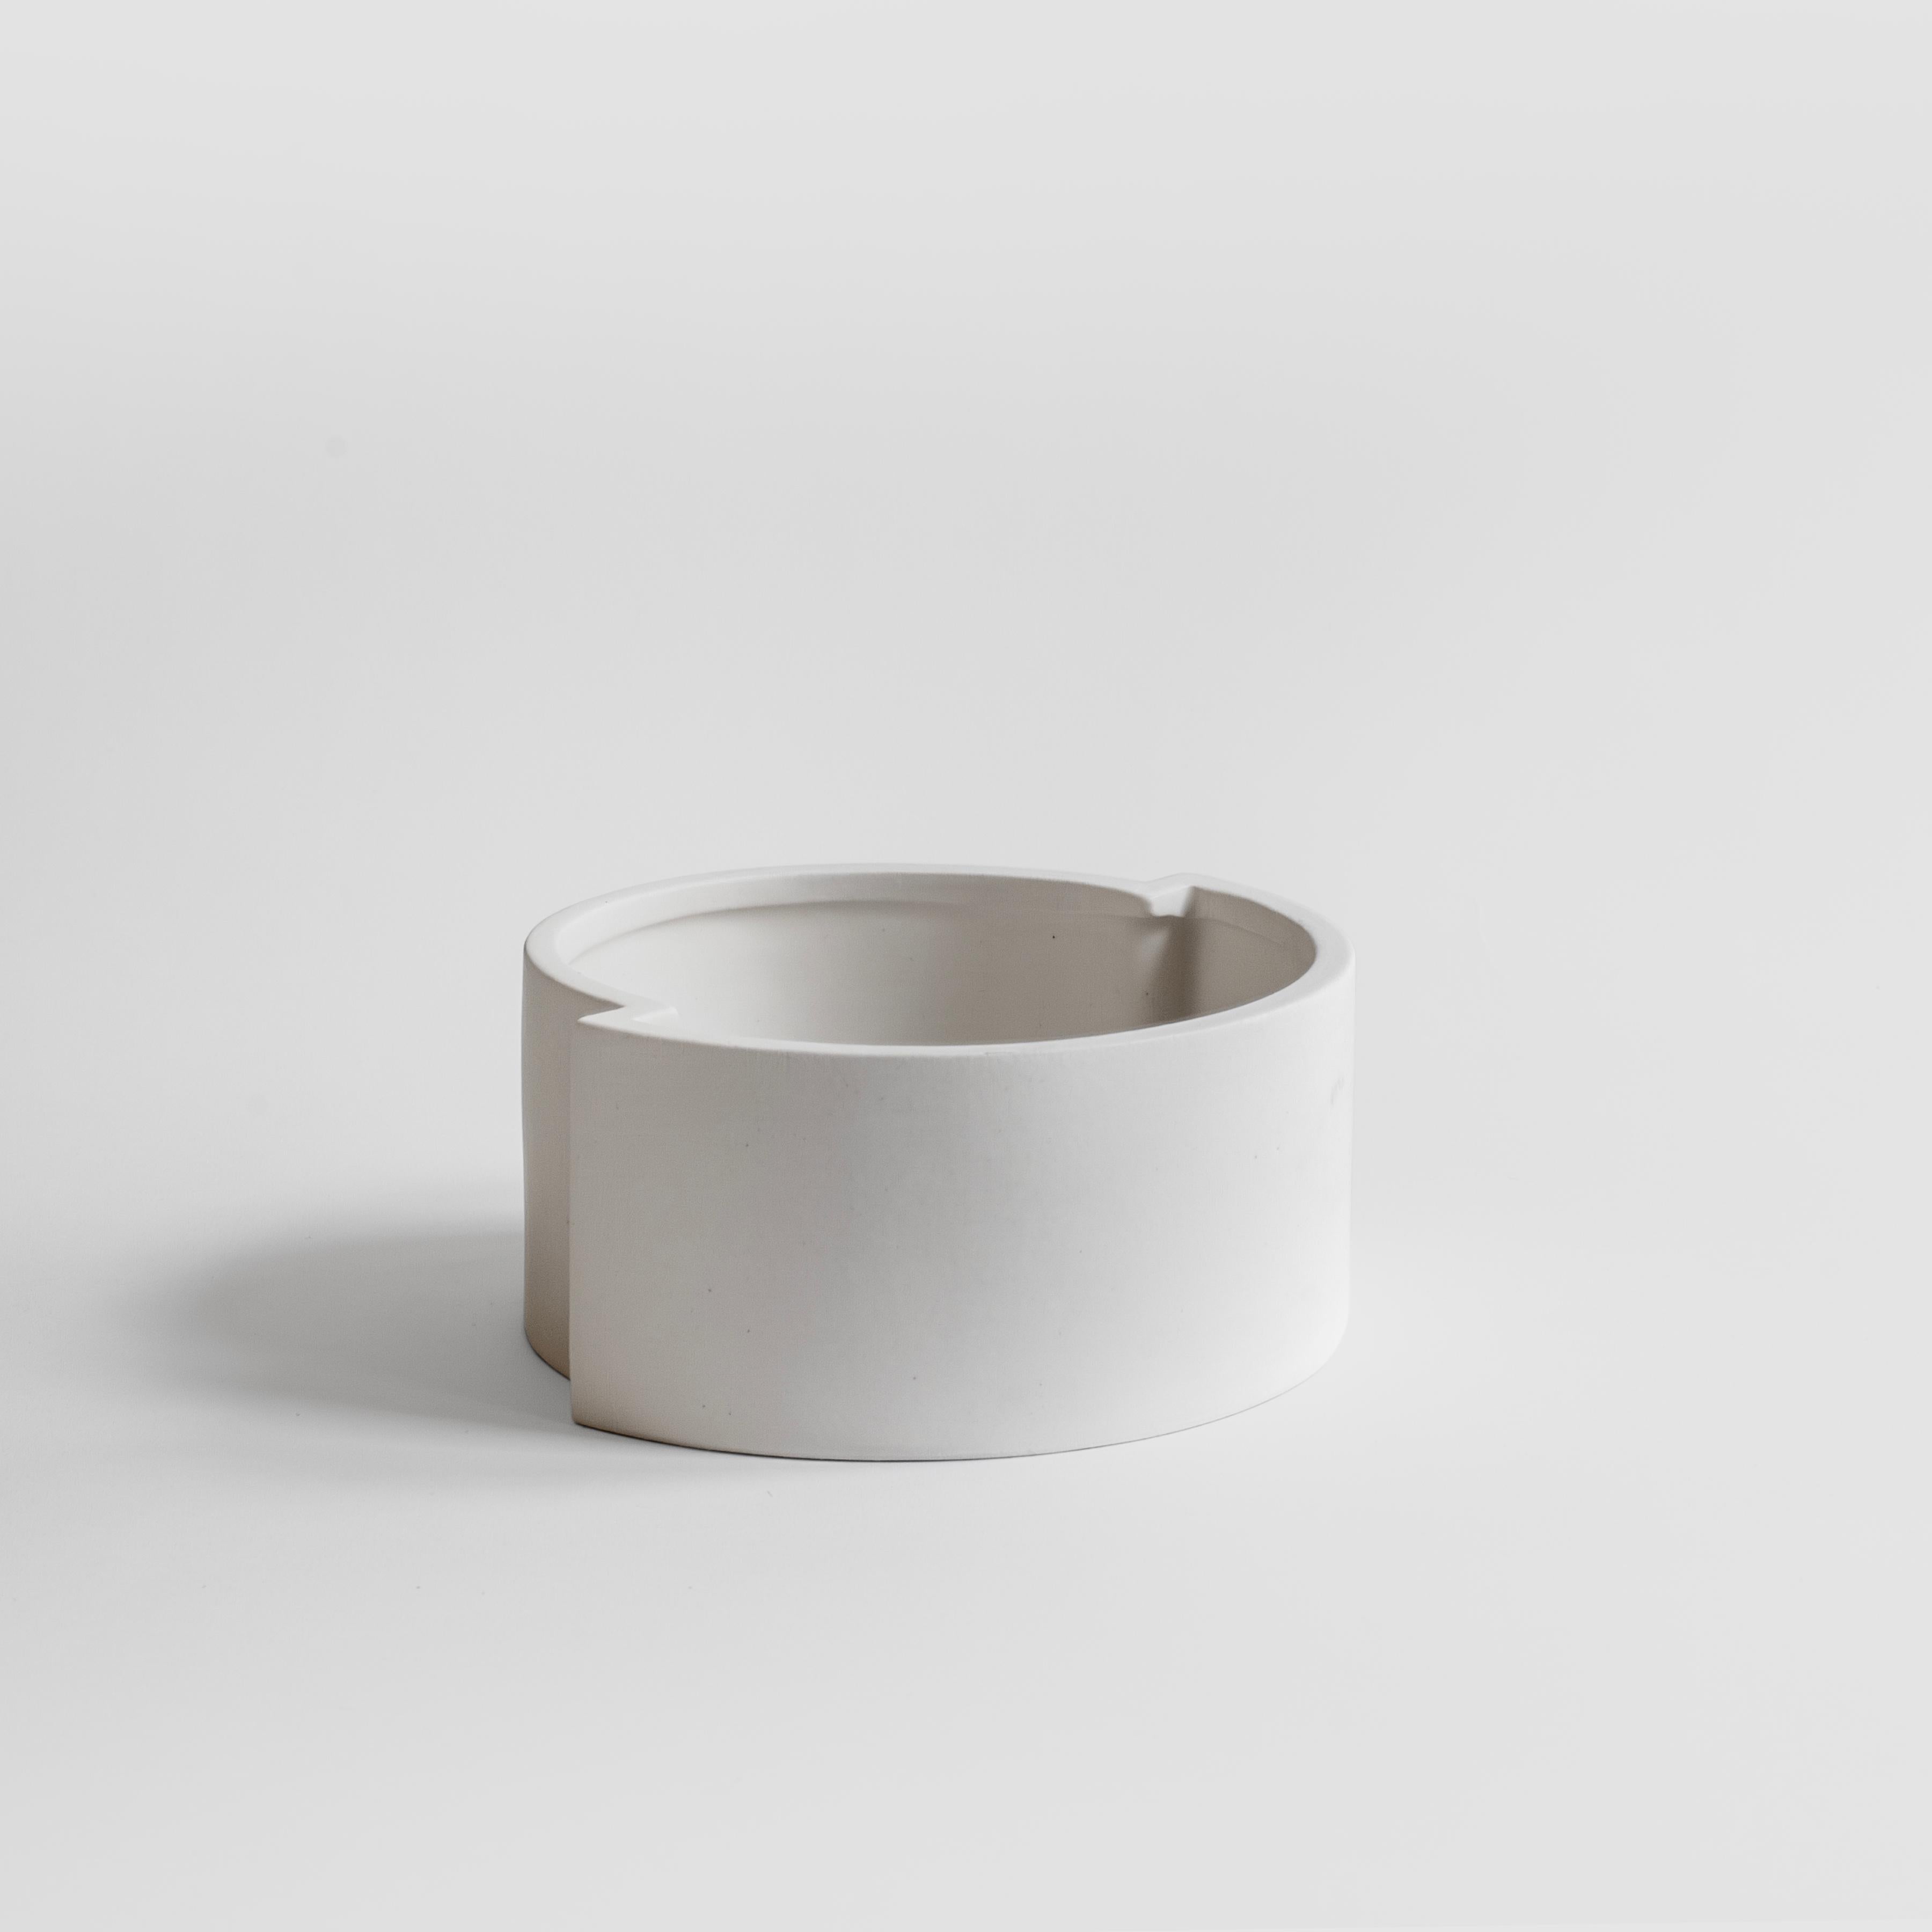 A minimalist and playful fruit bowl in slip-cast ceramic with a white matt crystalline glaze, the piece is handmade in Milan.
Part of the 